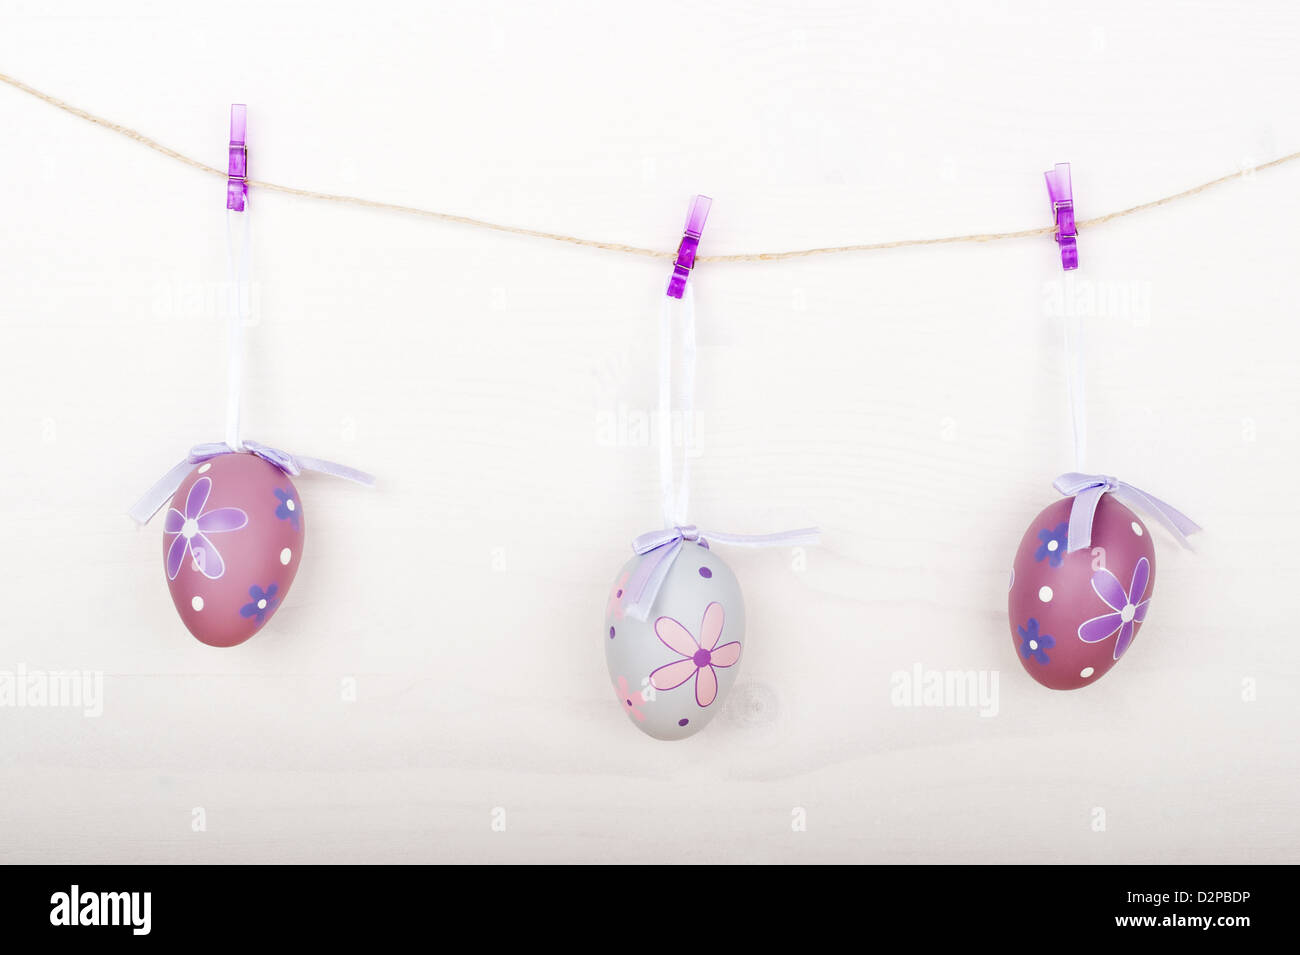 Purple Easter eggs hanging on a rope on clothespins, wooden background Stock Photo